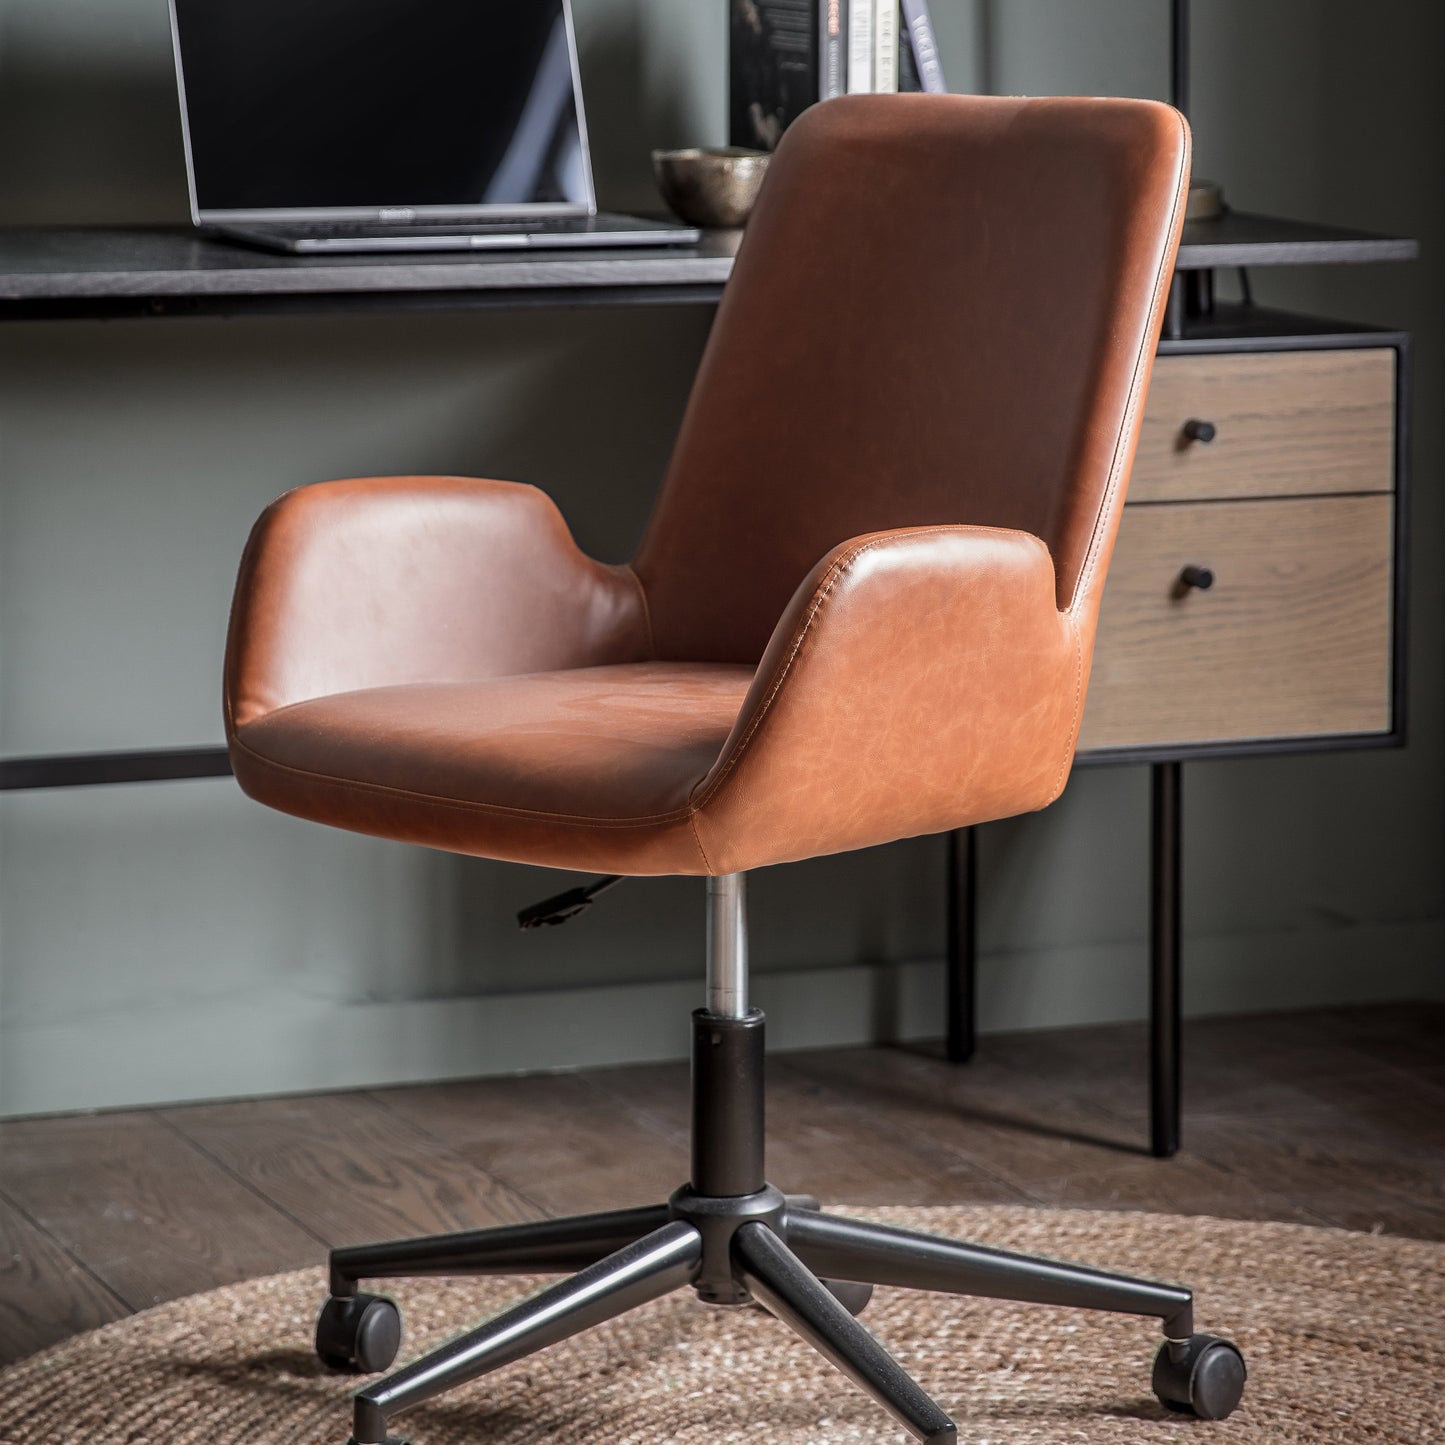 A Noss Swivel Chair Brown from Kikiathome.co.uk as a stylish addition to home furniture and interior decor.